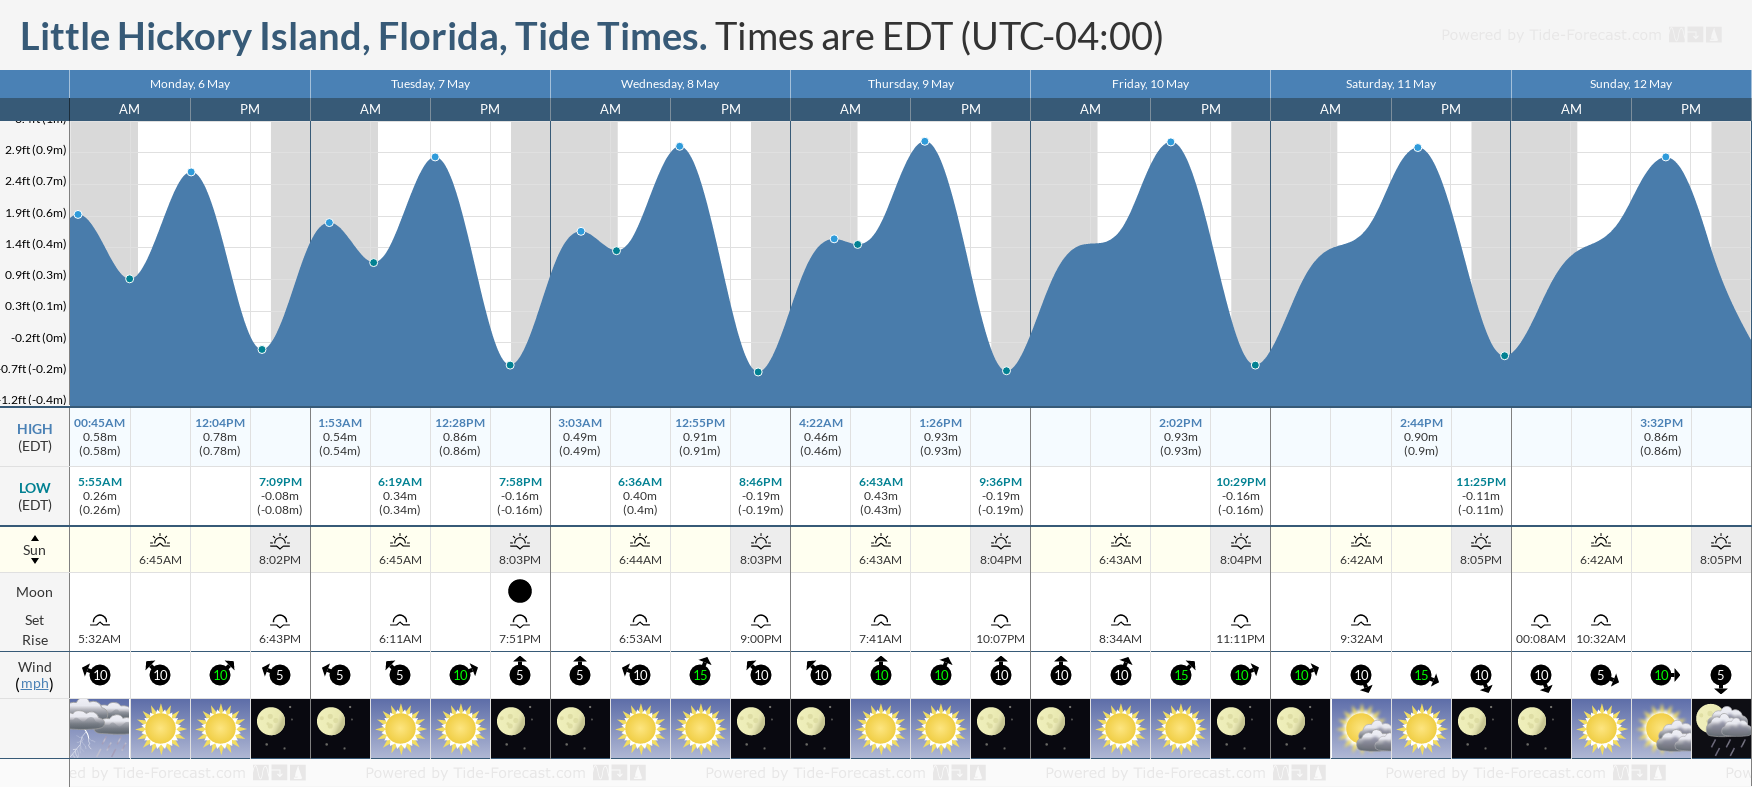 Little Hickory Island, Florida Tide Chart including high and low tide tide times for the next 7 days